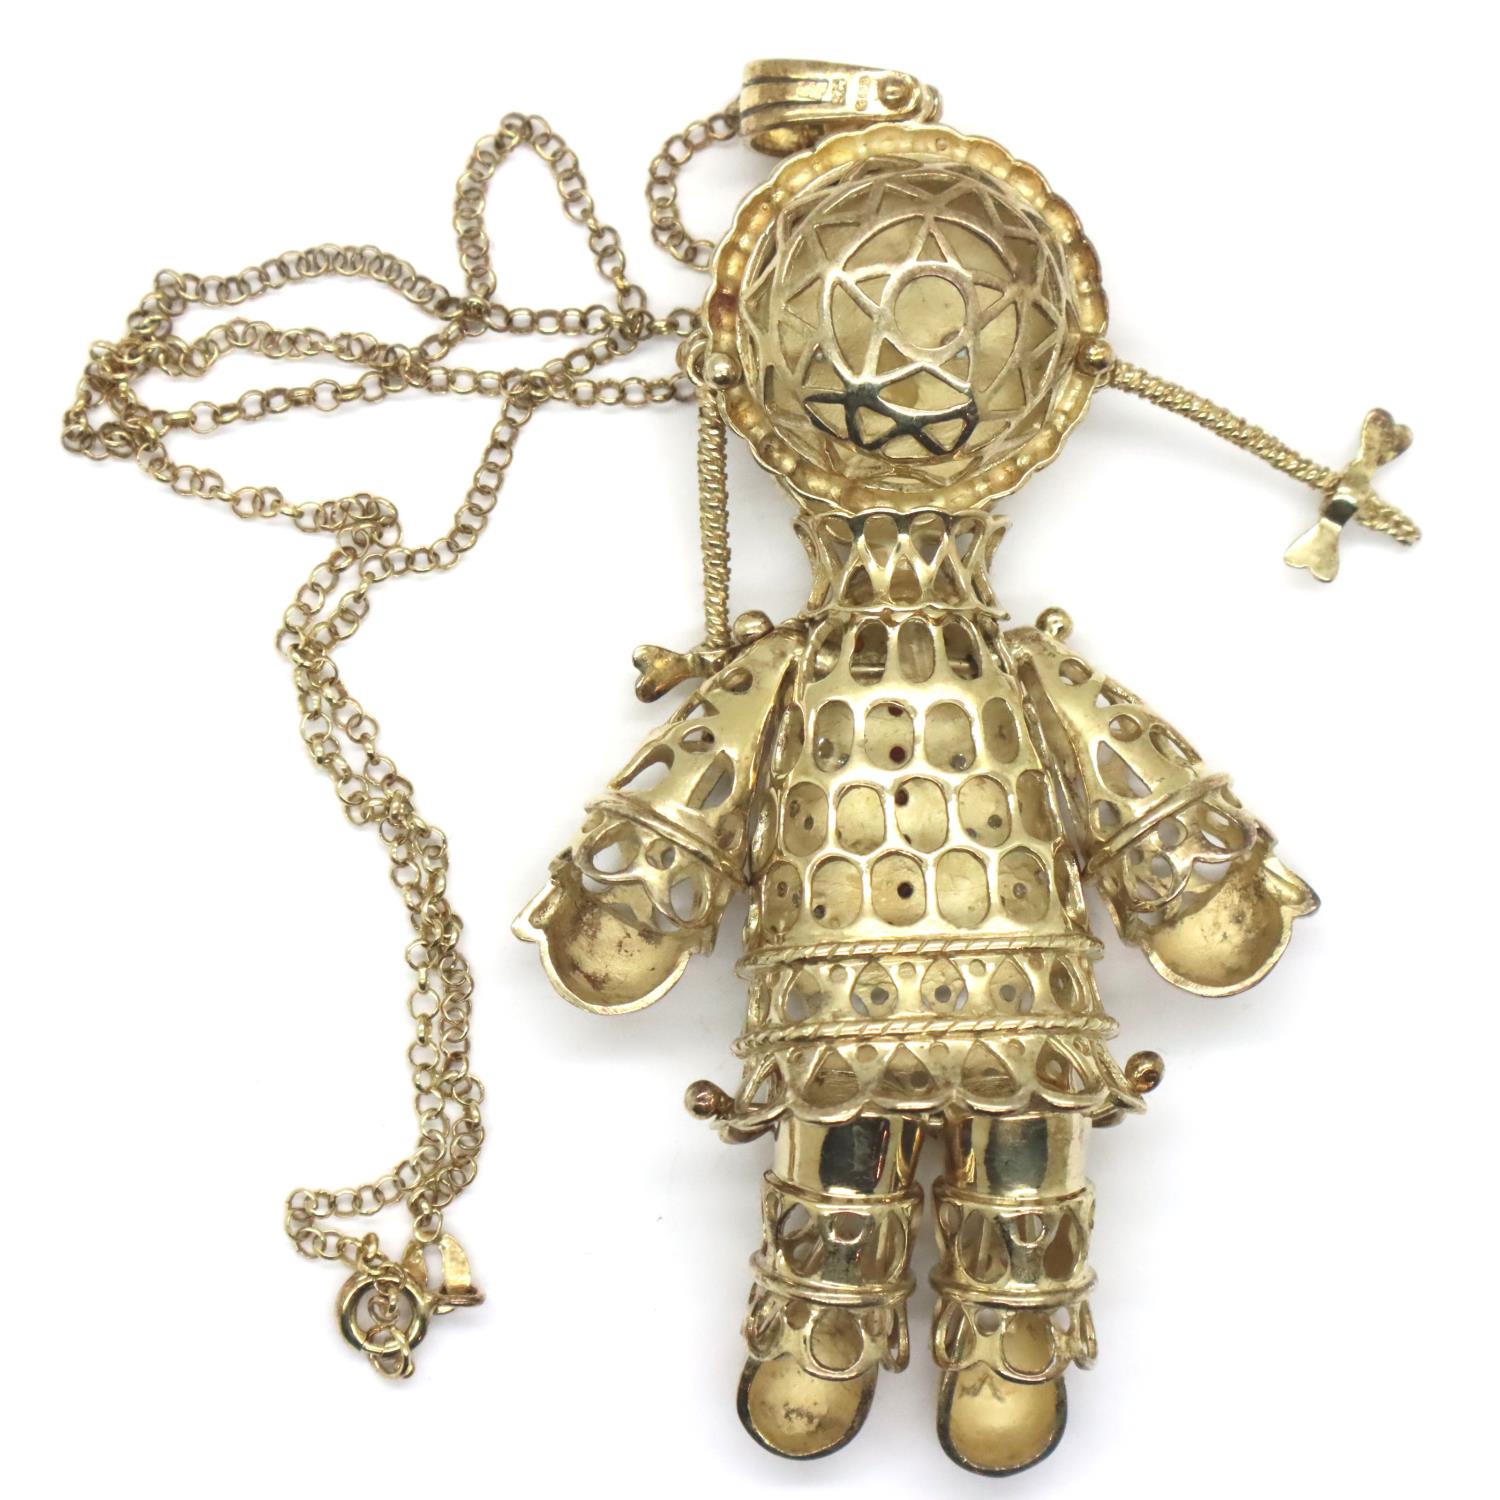 925 silver gold wash doll pendant and neck chain, pendant L: 80 mm, chain L: 44 cm, combined 36g. - Image 2 of 3